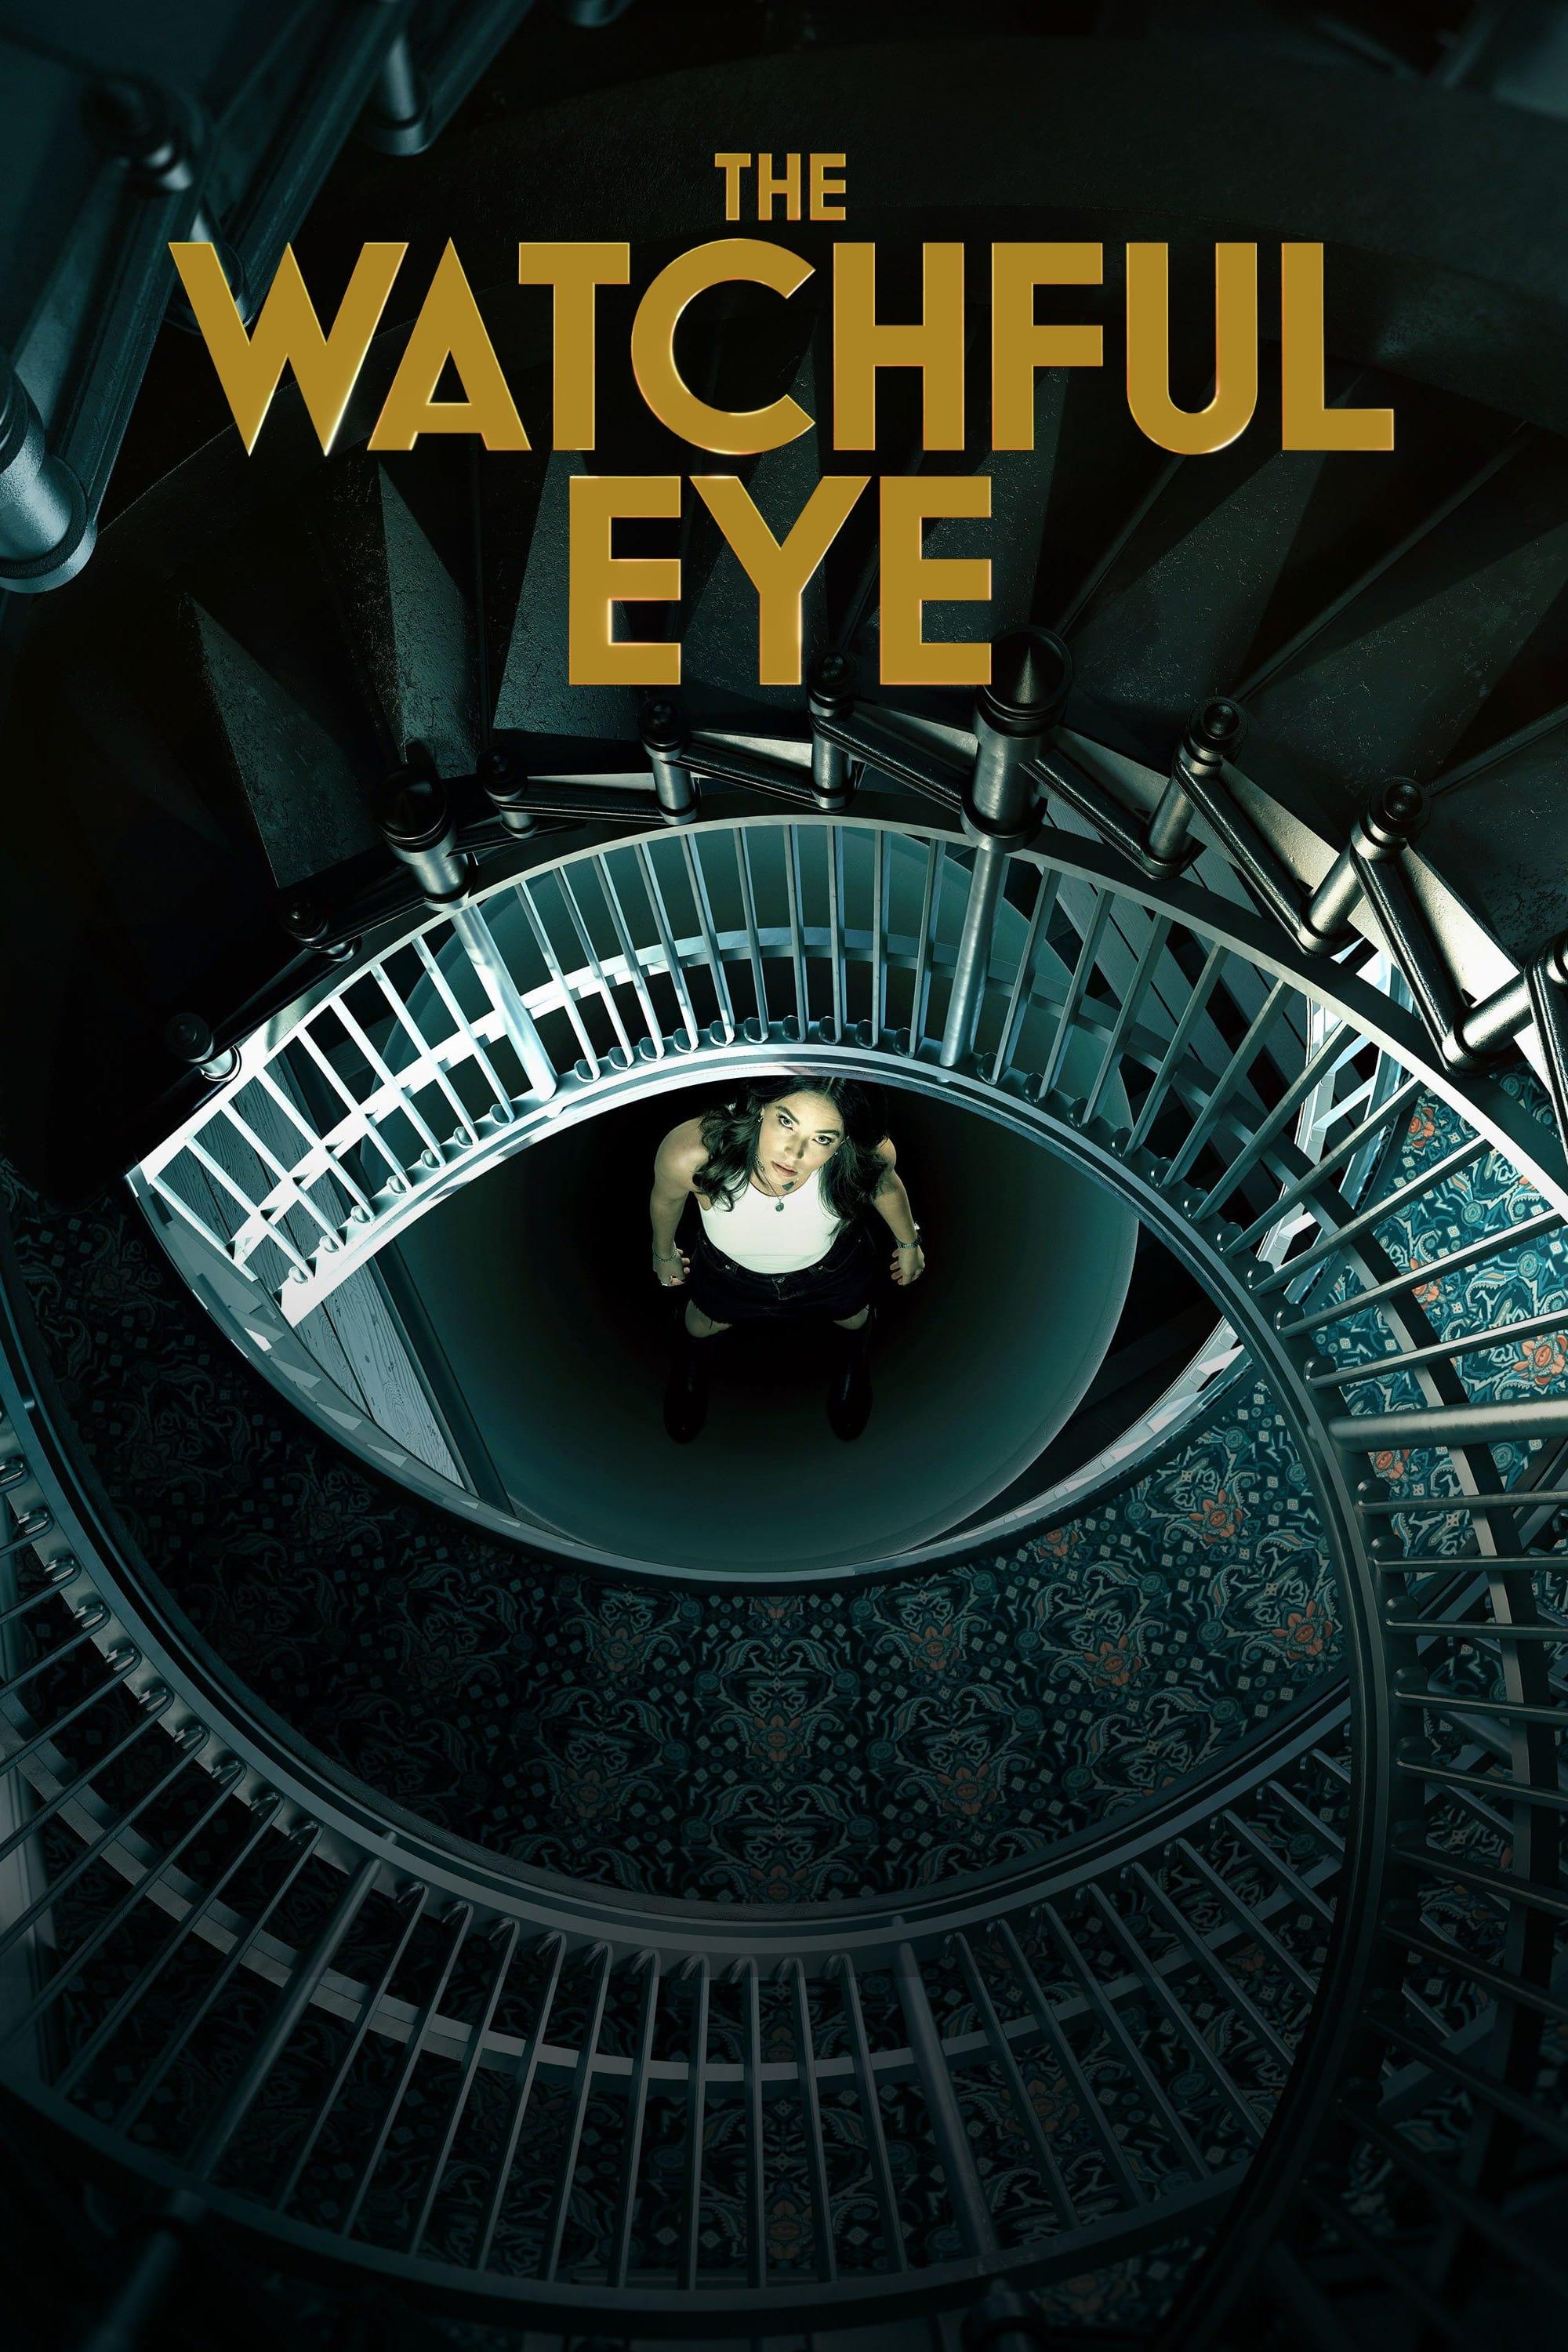 The Watchful Eye poster